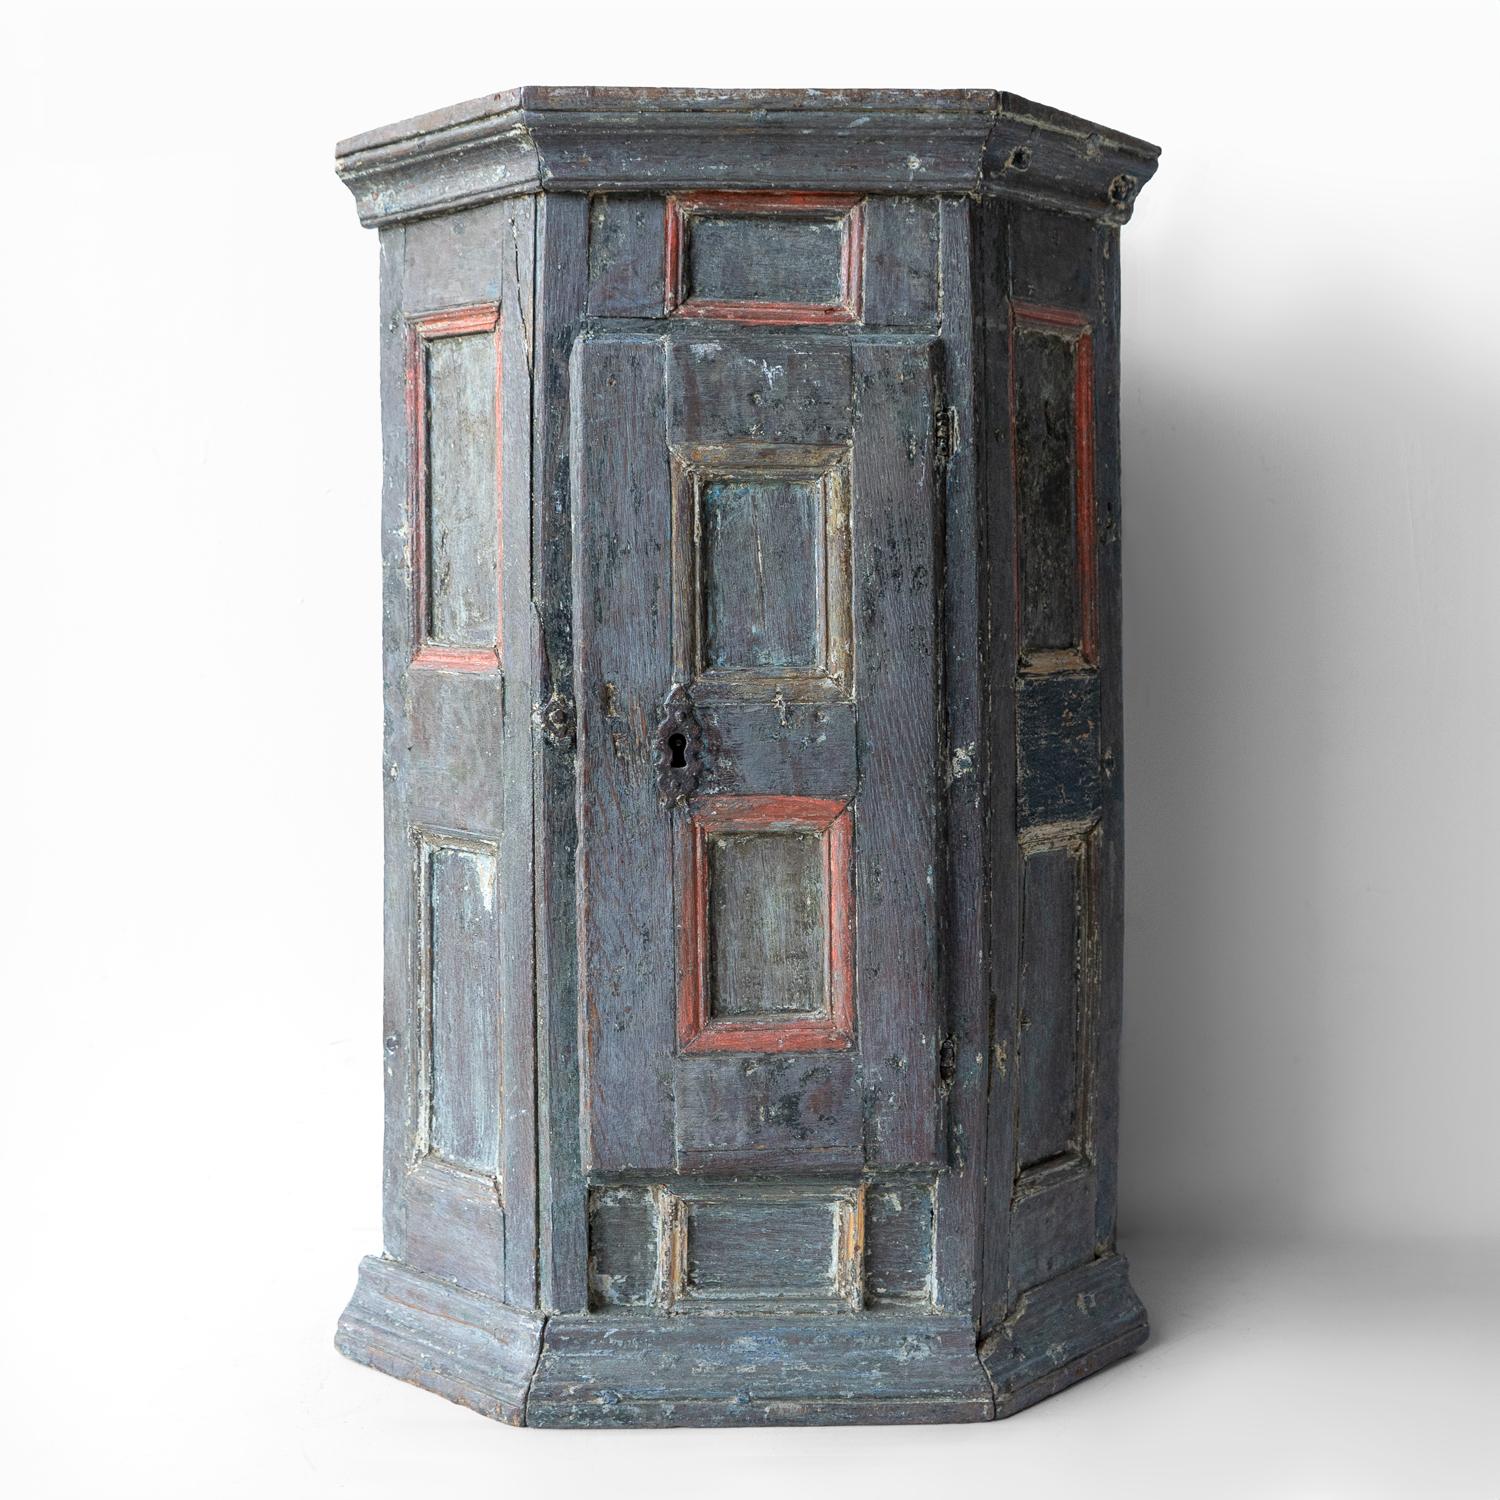 ANTIQUE SWEDISH CORNER CABINET 

A decorative and characterful cabinet with a panelled door and sides and a moulded cornice.

Layers of original and later paint, which has worn in places paint a deep blue/grey with red accents. 

Could be wall